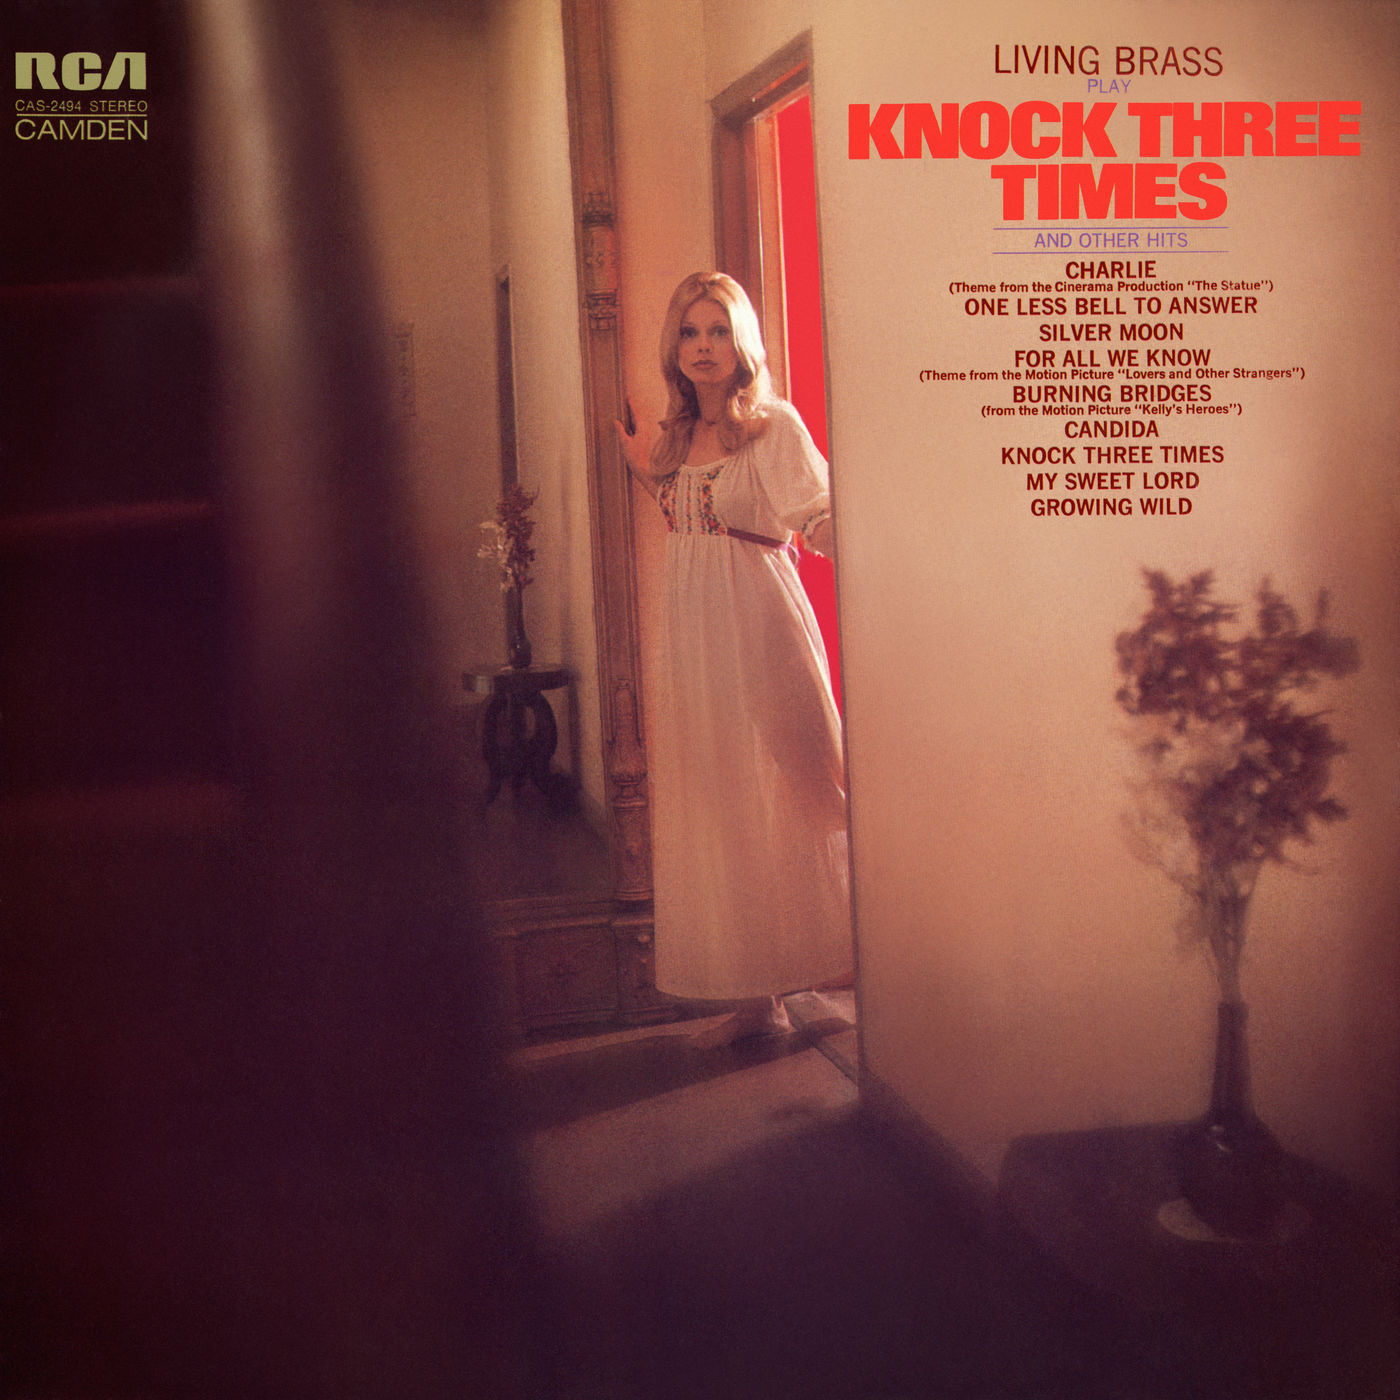 Living Brass – Living Brass Play “Knock Three Times” and Other Hits (1971/2021) [FLAC 24bit/192kHz]